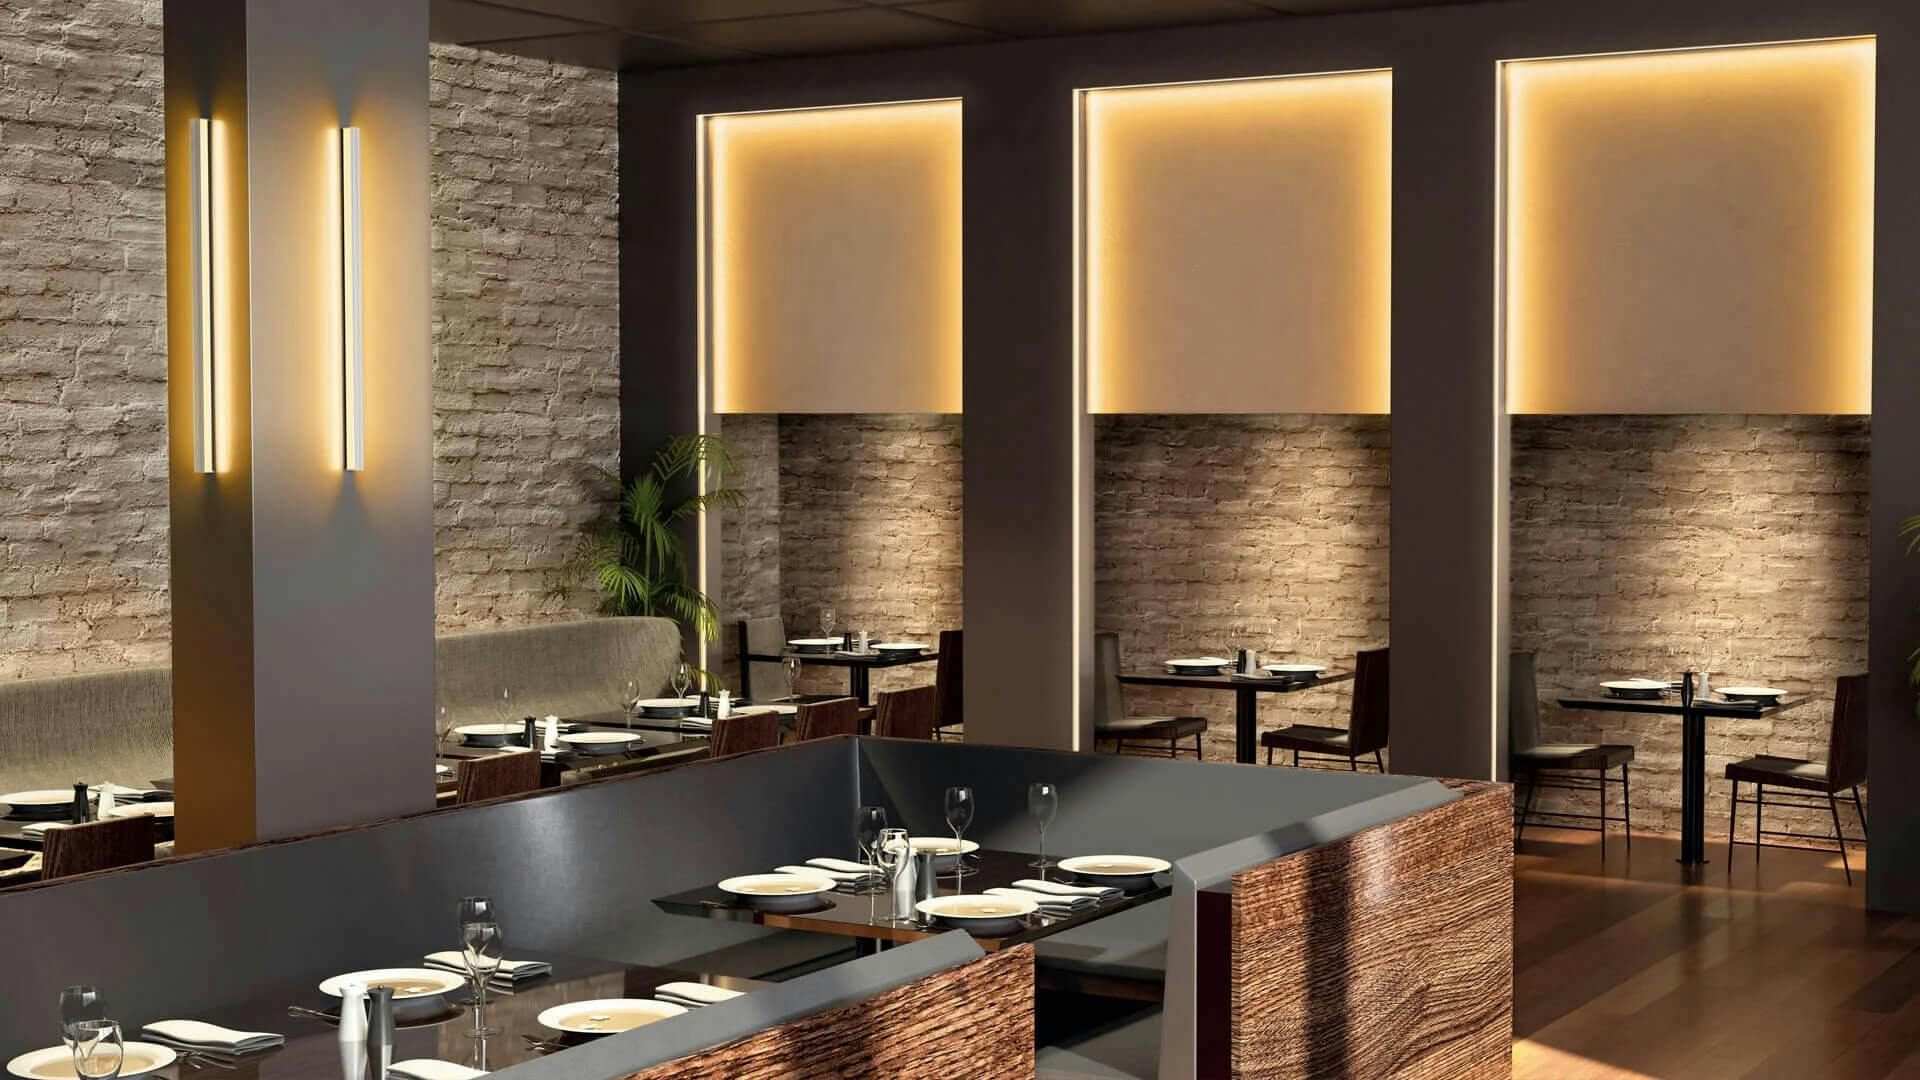 Interior of a restaurant featuring warm channel lighting in the walls